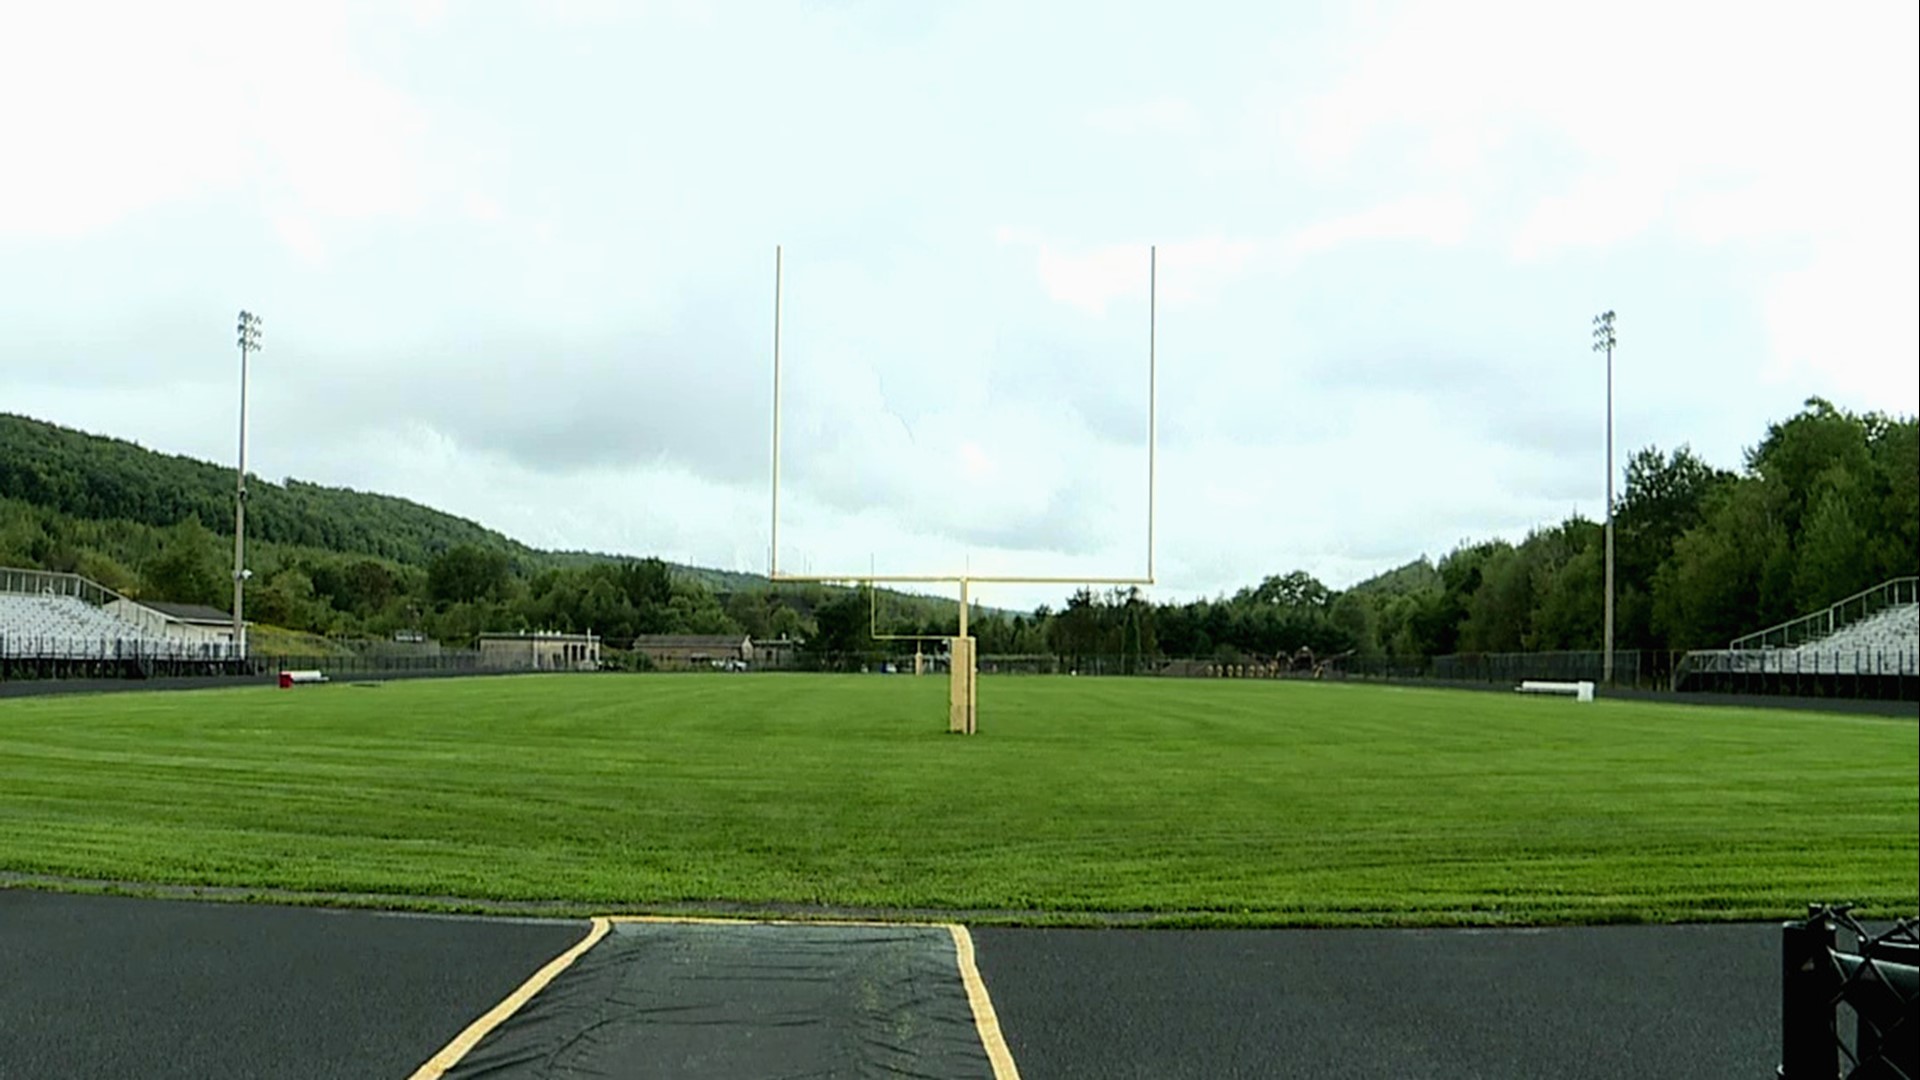 Leading up to game day, coaches and athletic directors will have to work together to stay under Gov. Tom Wolf's restriction of 250 people maximum at games.